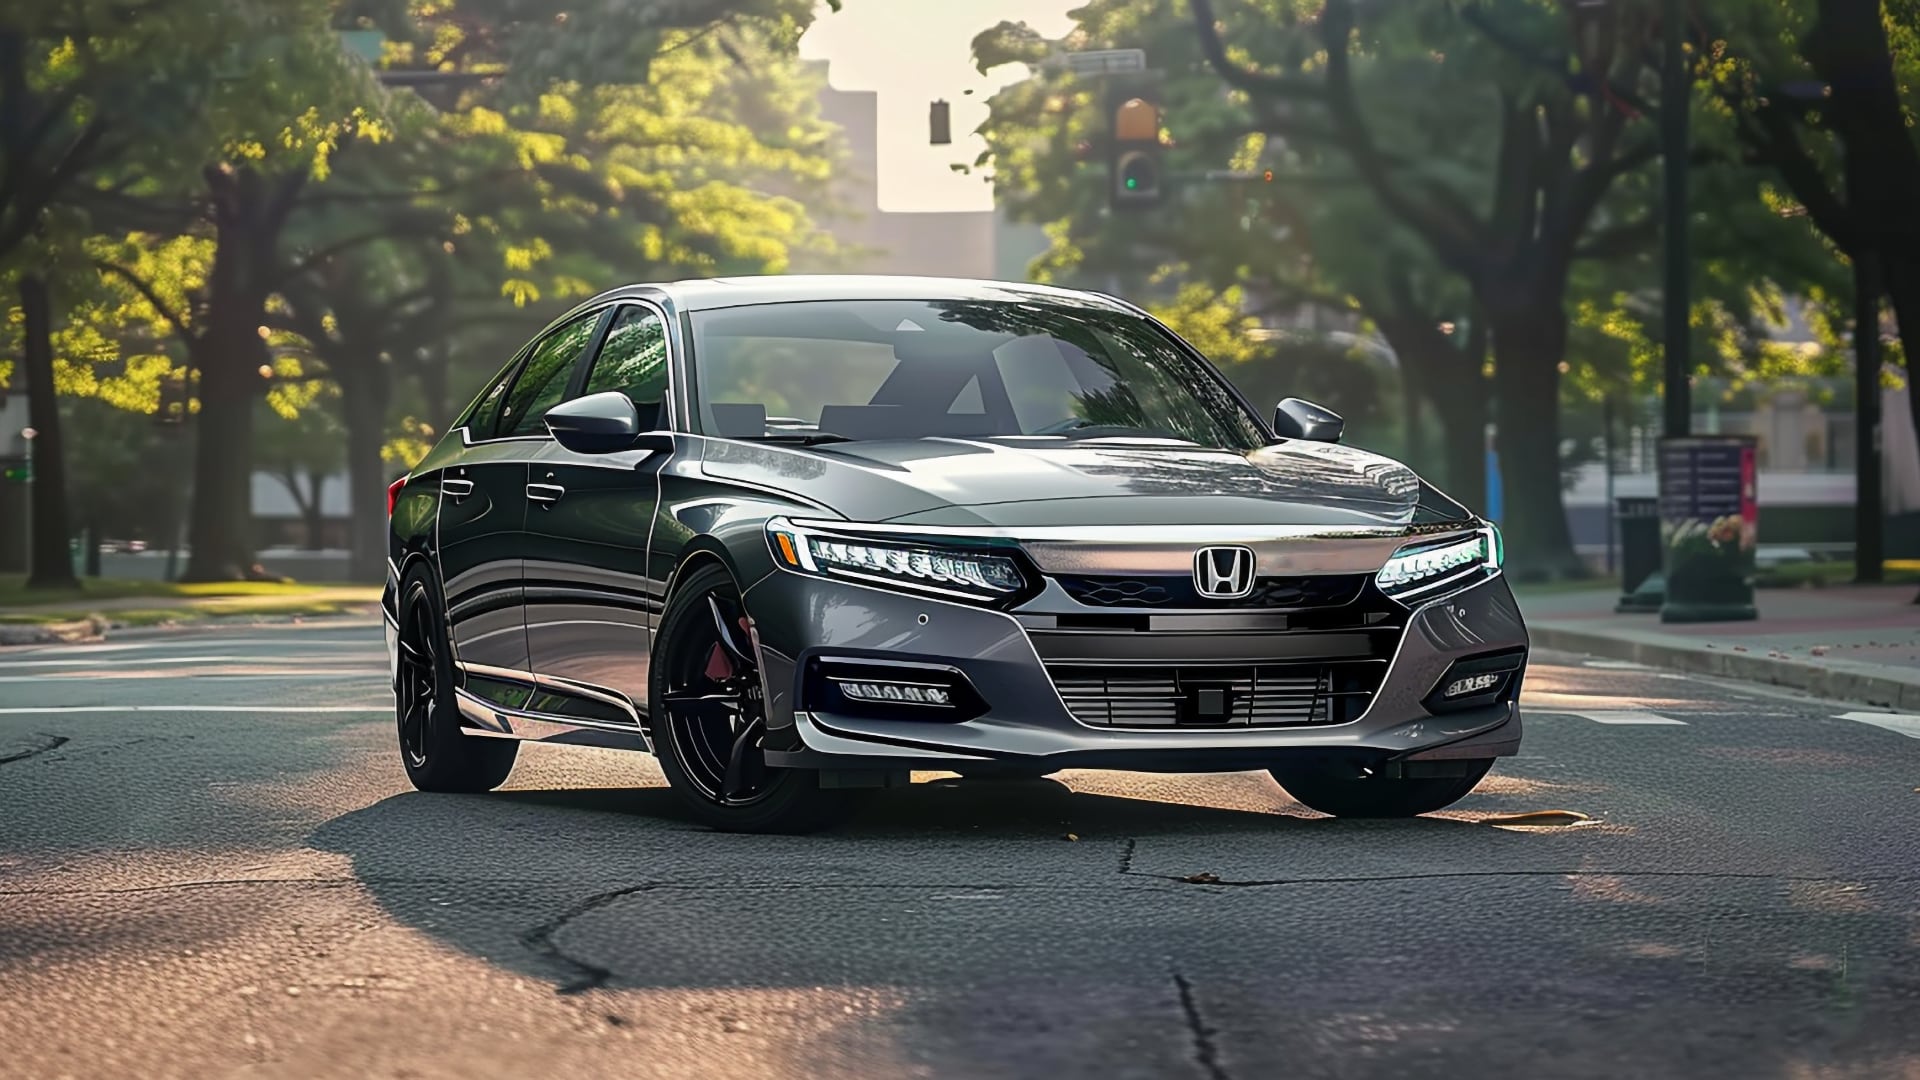 The 2019 Honda Accord, a year to avoid according to some sources, is parked on a city street.